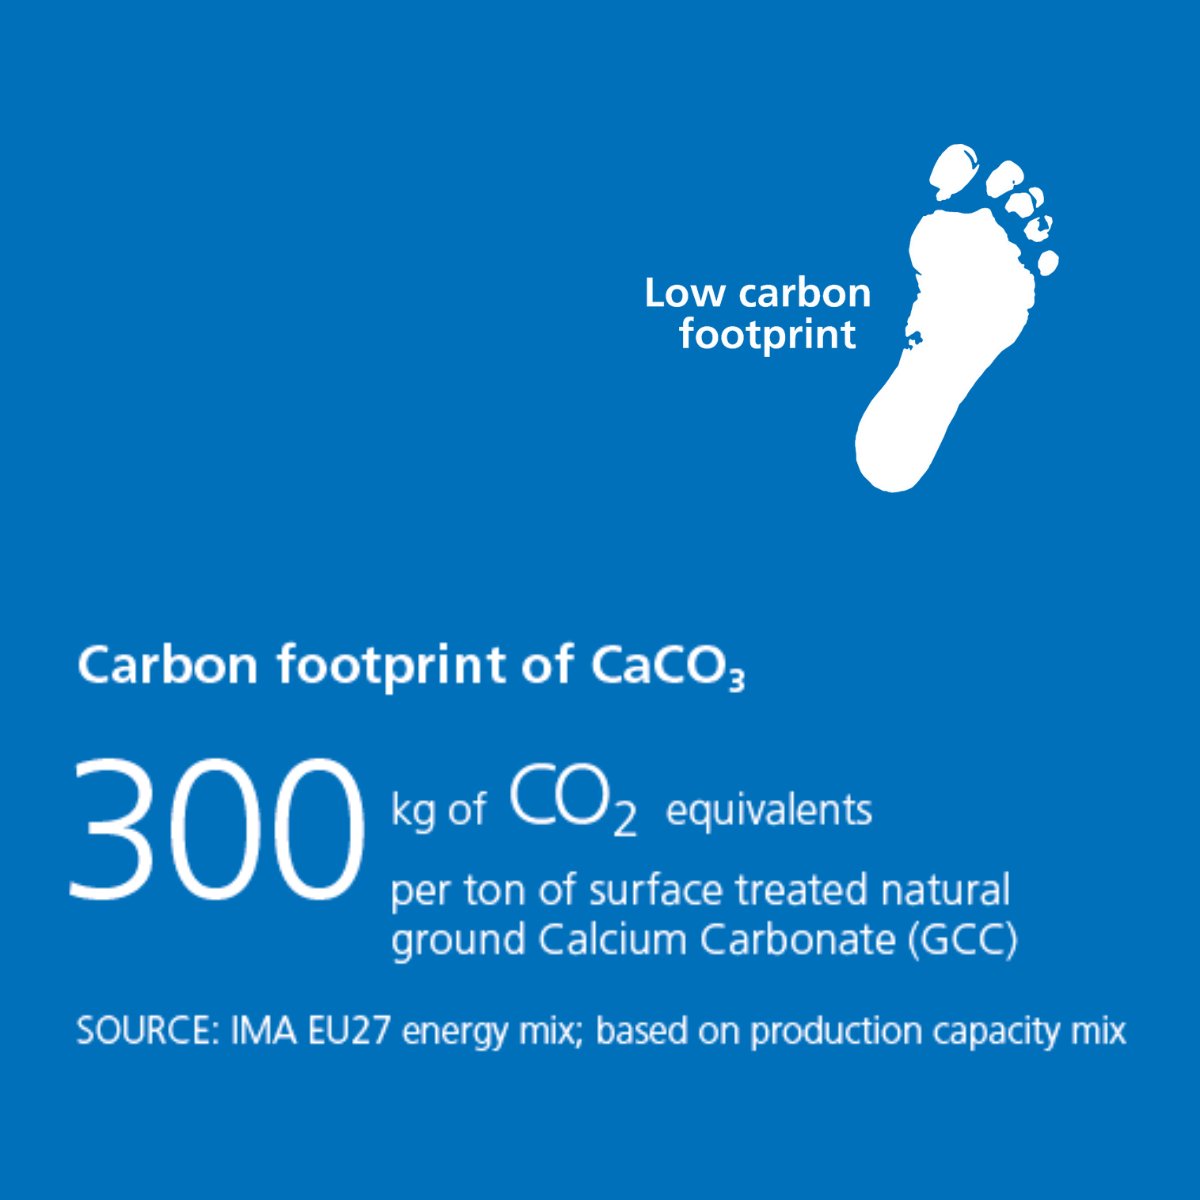 Low carbon footprint of 300kg of CO2 equivalents per ton of surface treated natural ground calcium carbonate 